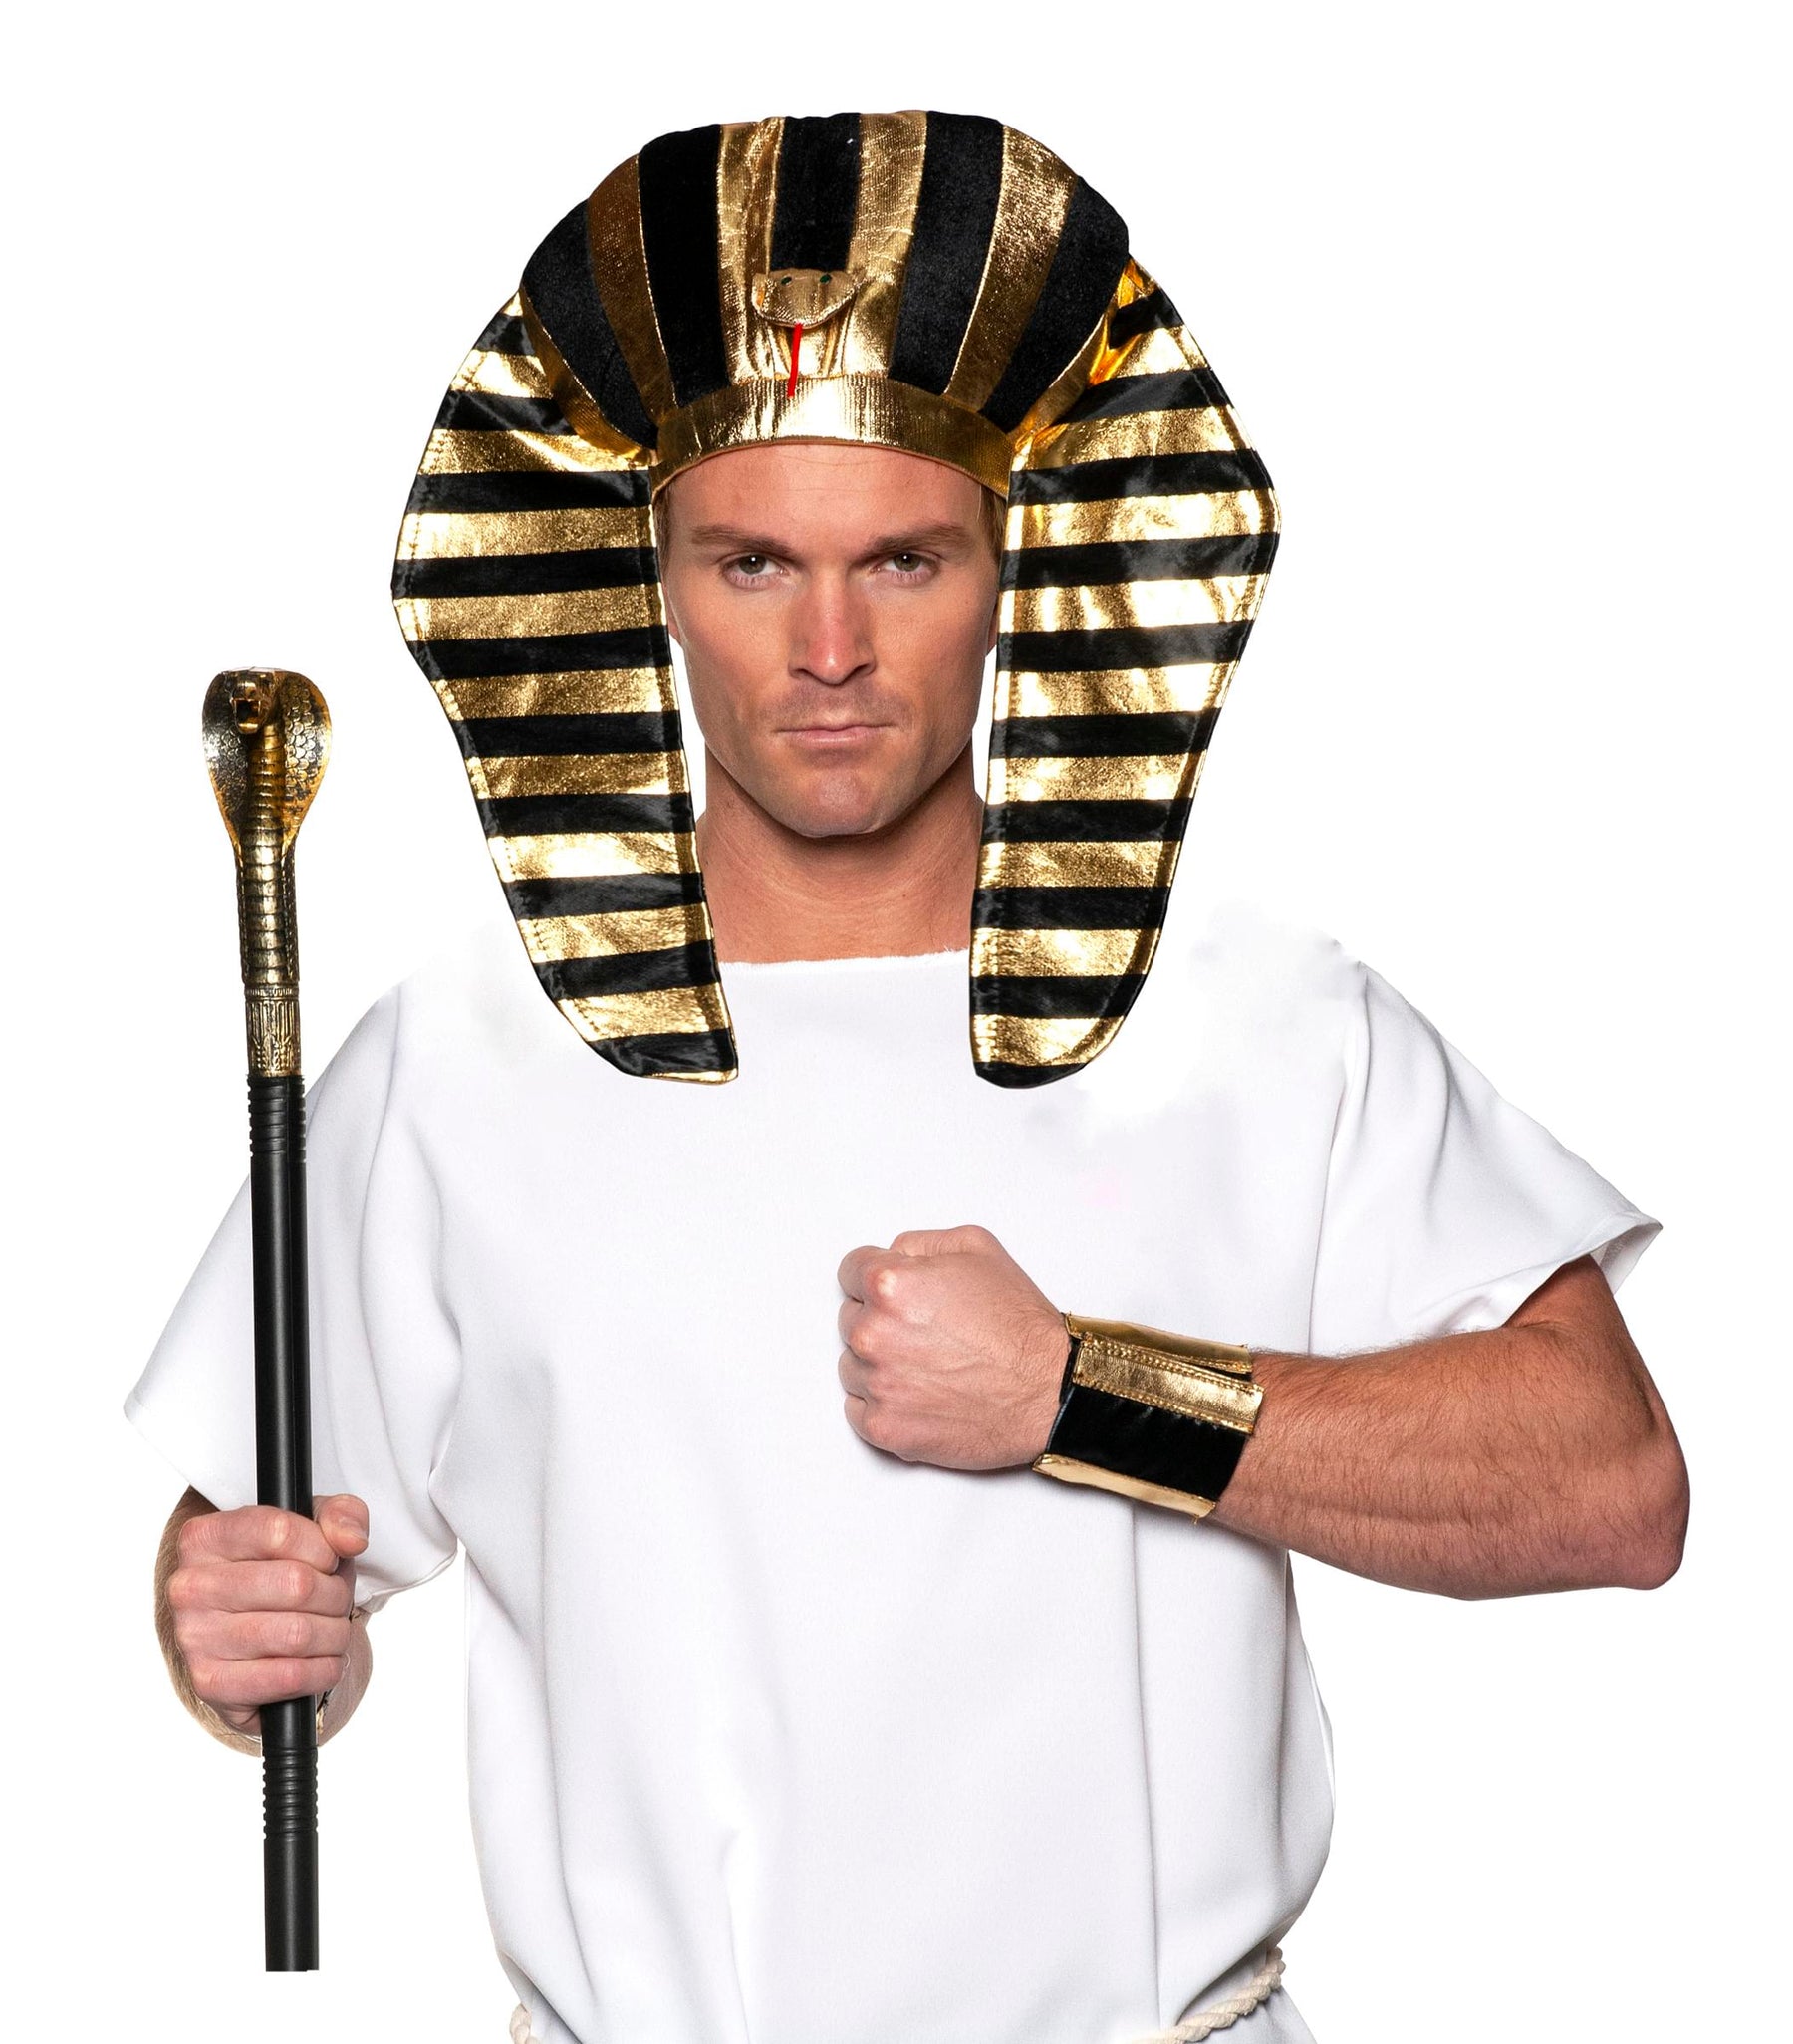 Egyptian 3 Piece Adult Costume Accessory Kit | One Size